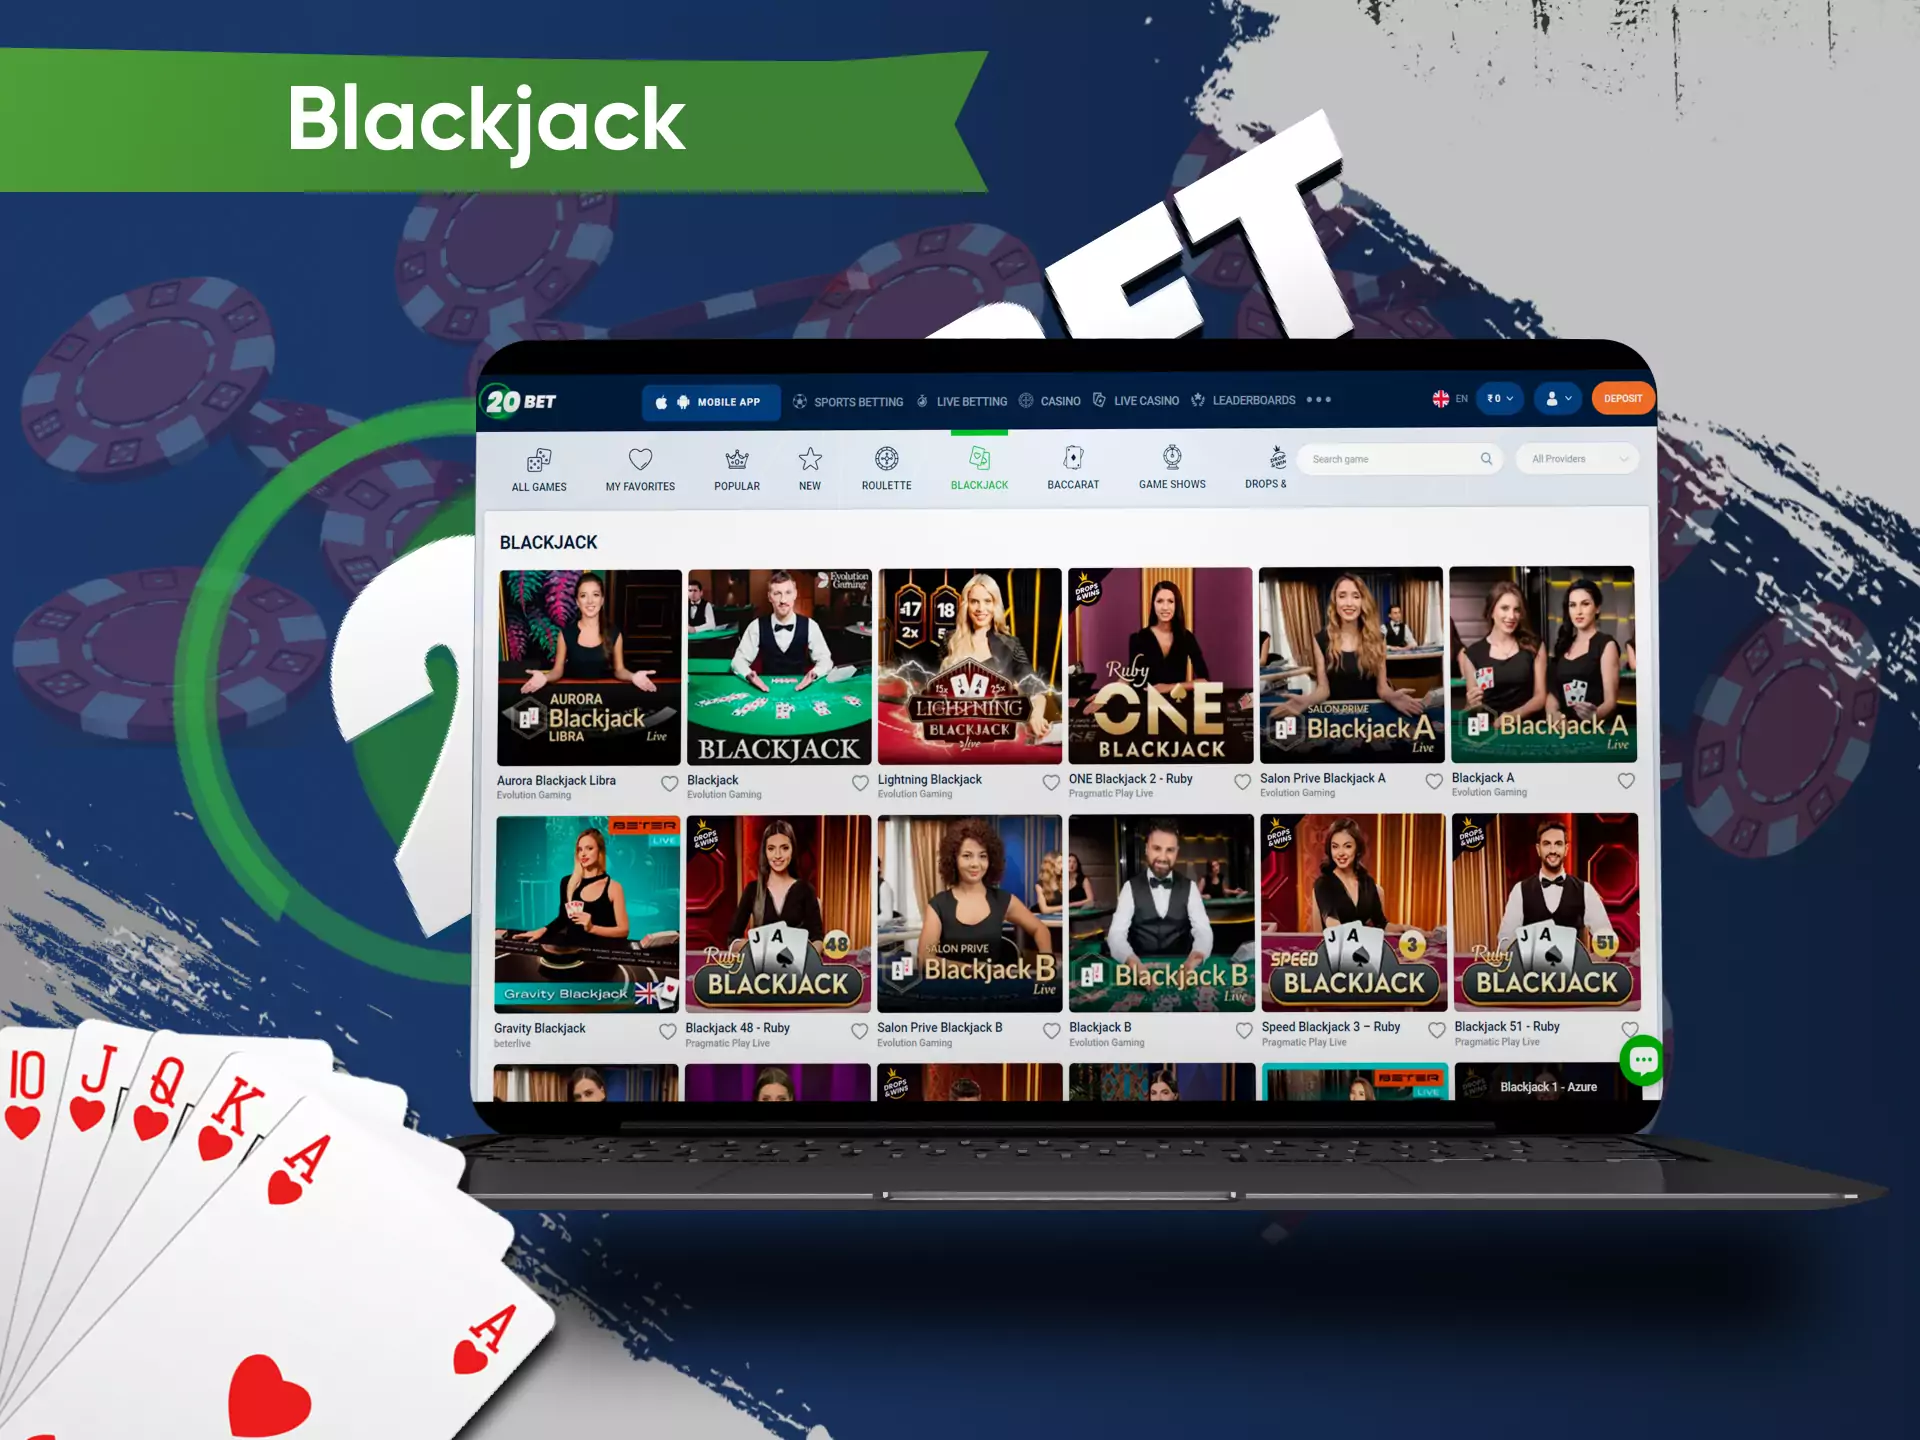 Go to the 20bet casino to play blackjack online.